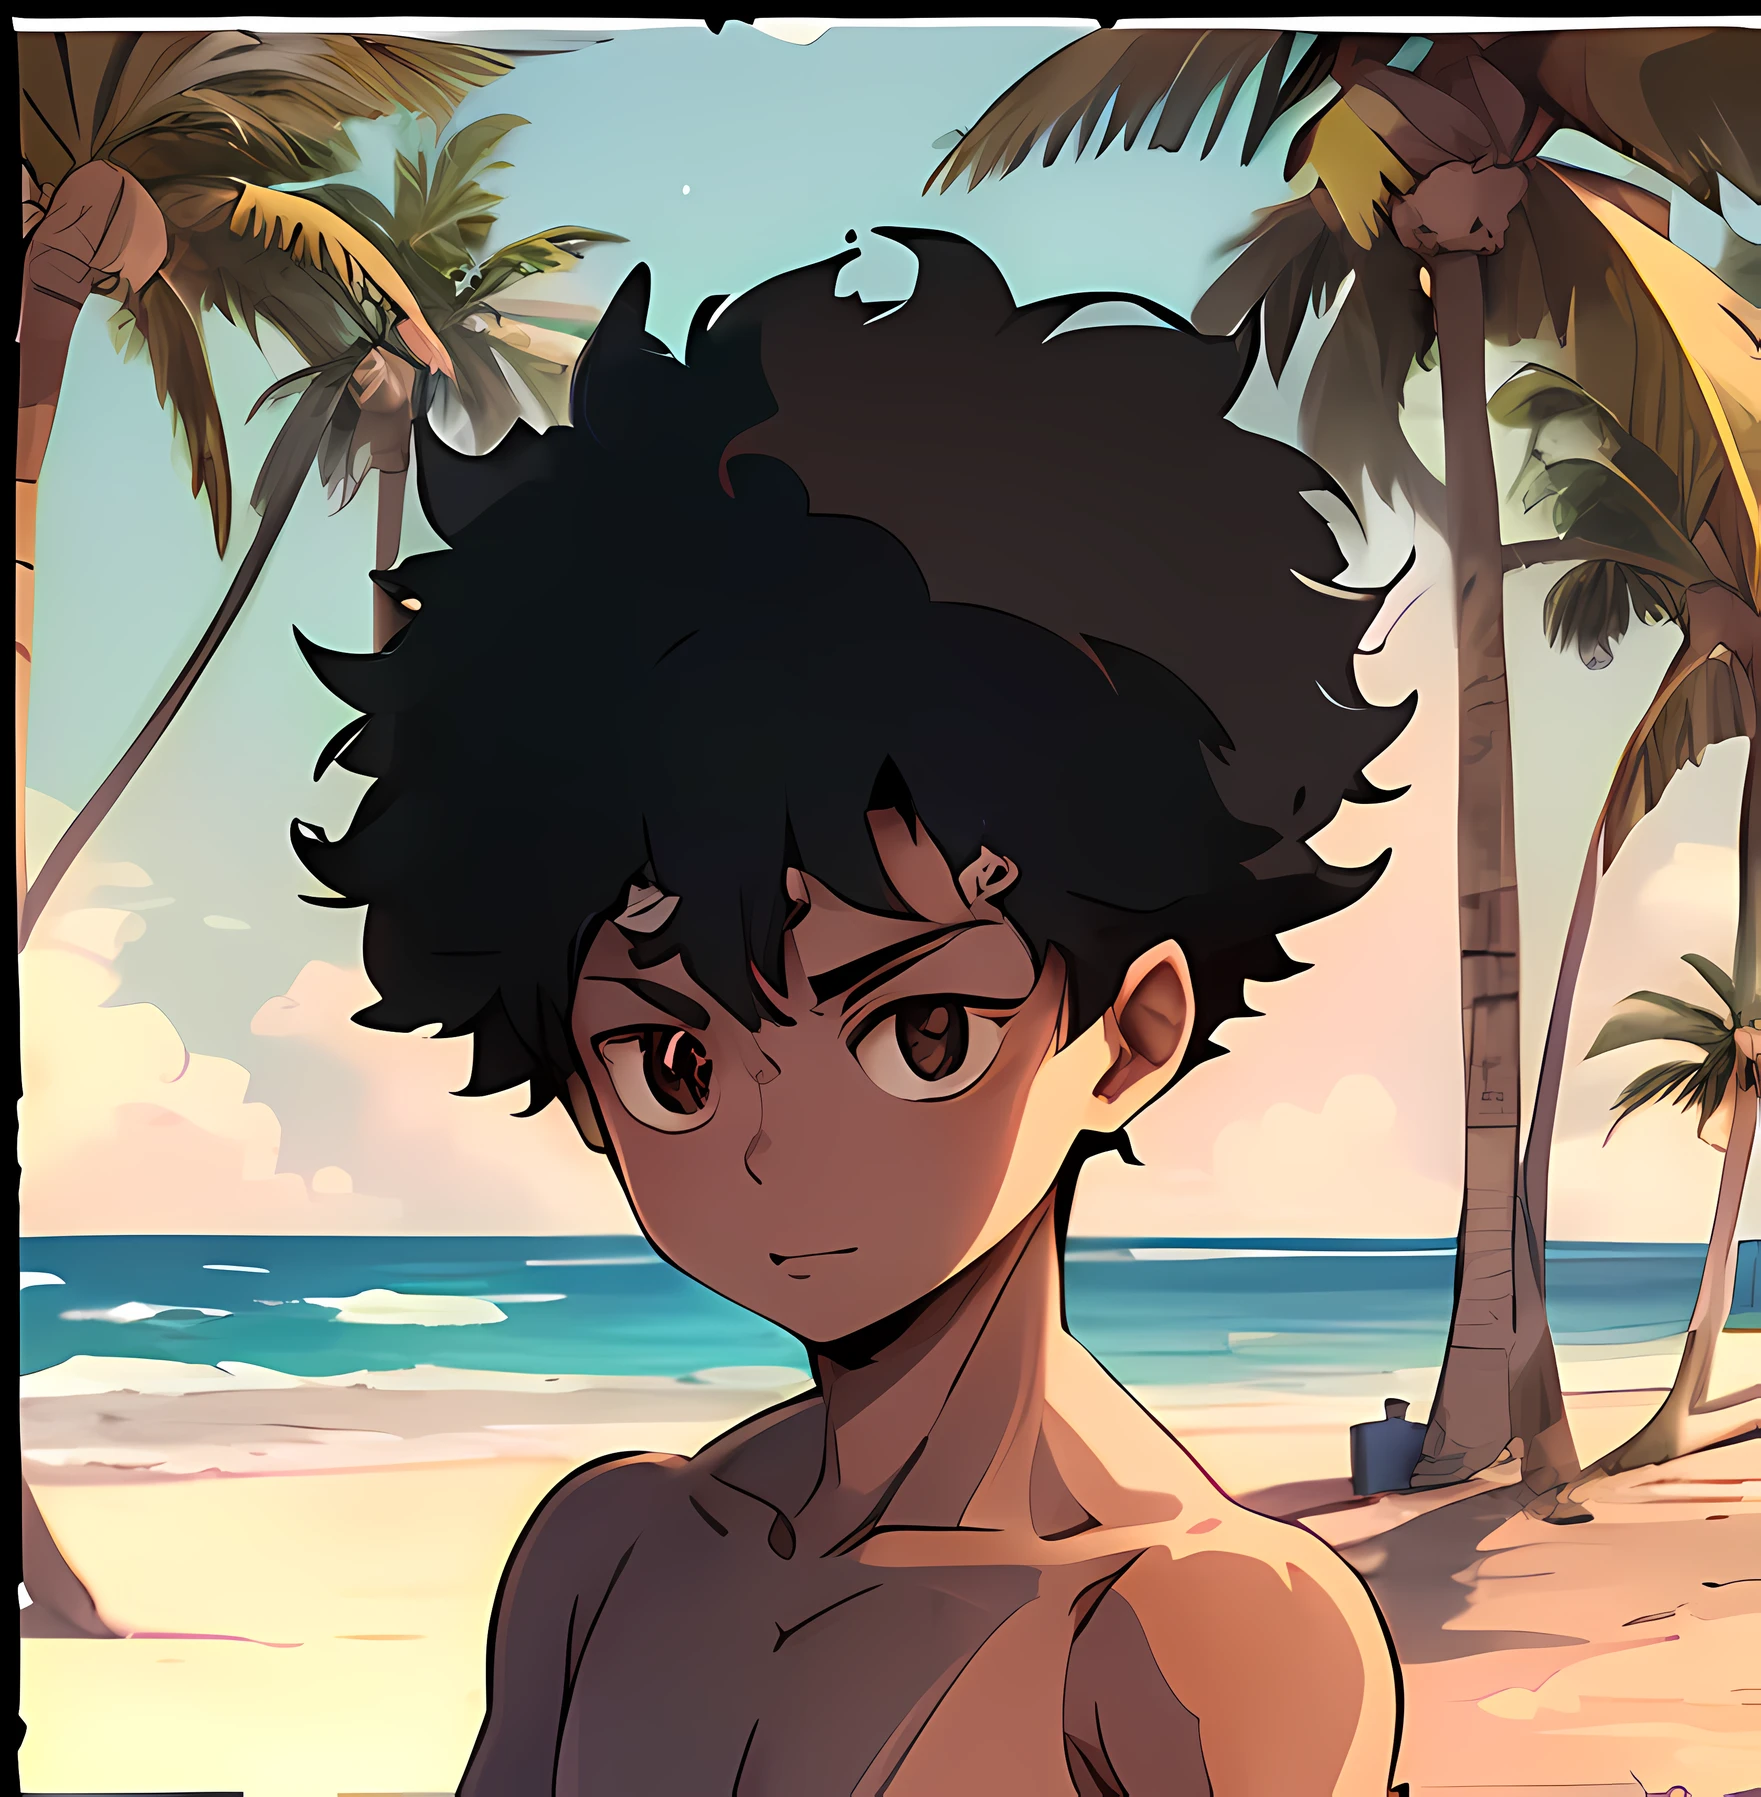 anime boy with glasses standing on the beach near palm trees, offcial art, afro, em uma praia, anime afrofuturism, he has short curly brown hair, at beach, with afro, curly afro, handsome guy in demon slayer art, at beach, high quality anime artstyle, at beach, offcial art, detailed fanart, official illustration, official fanart --auto